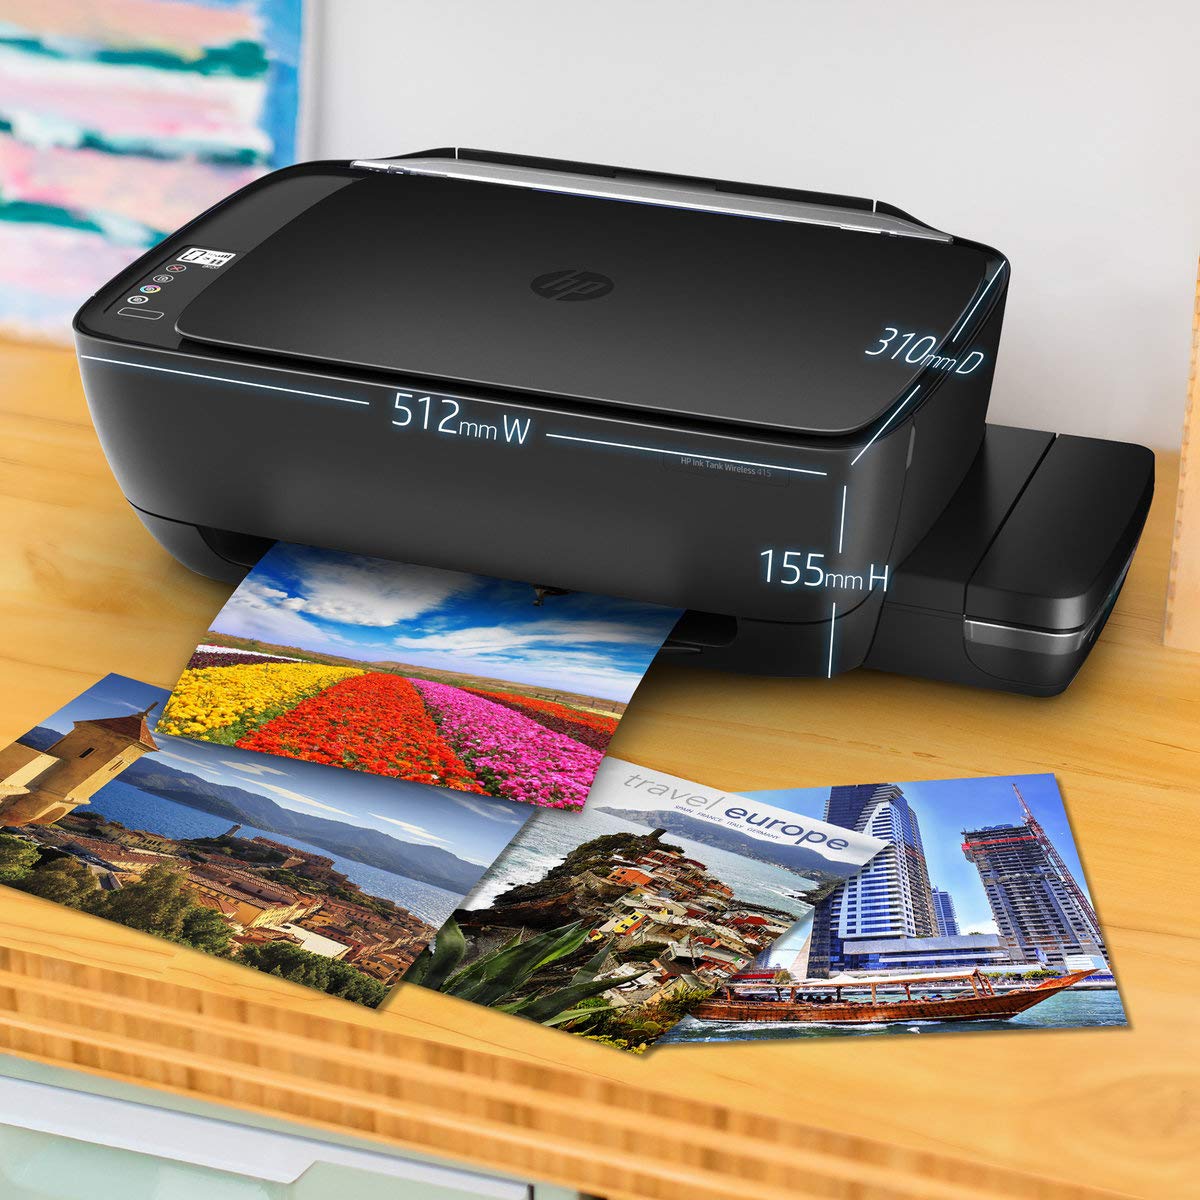 HP 415 All-in-One Ink Tank Wireless Color Printer (Black)